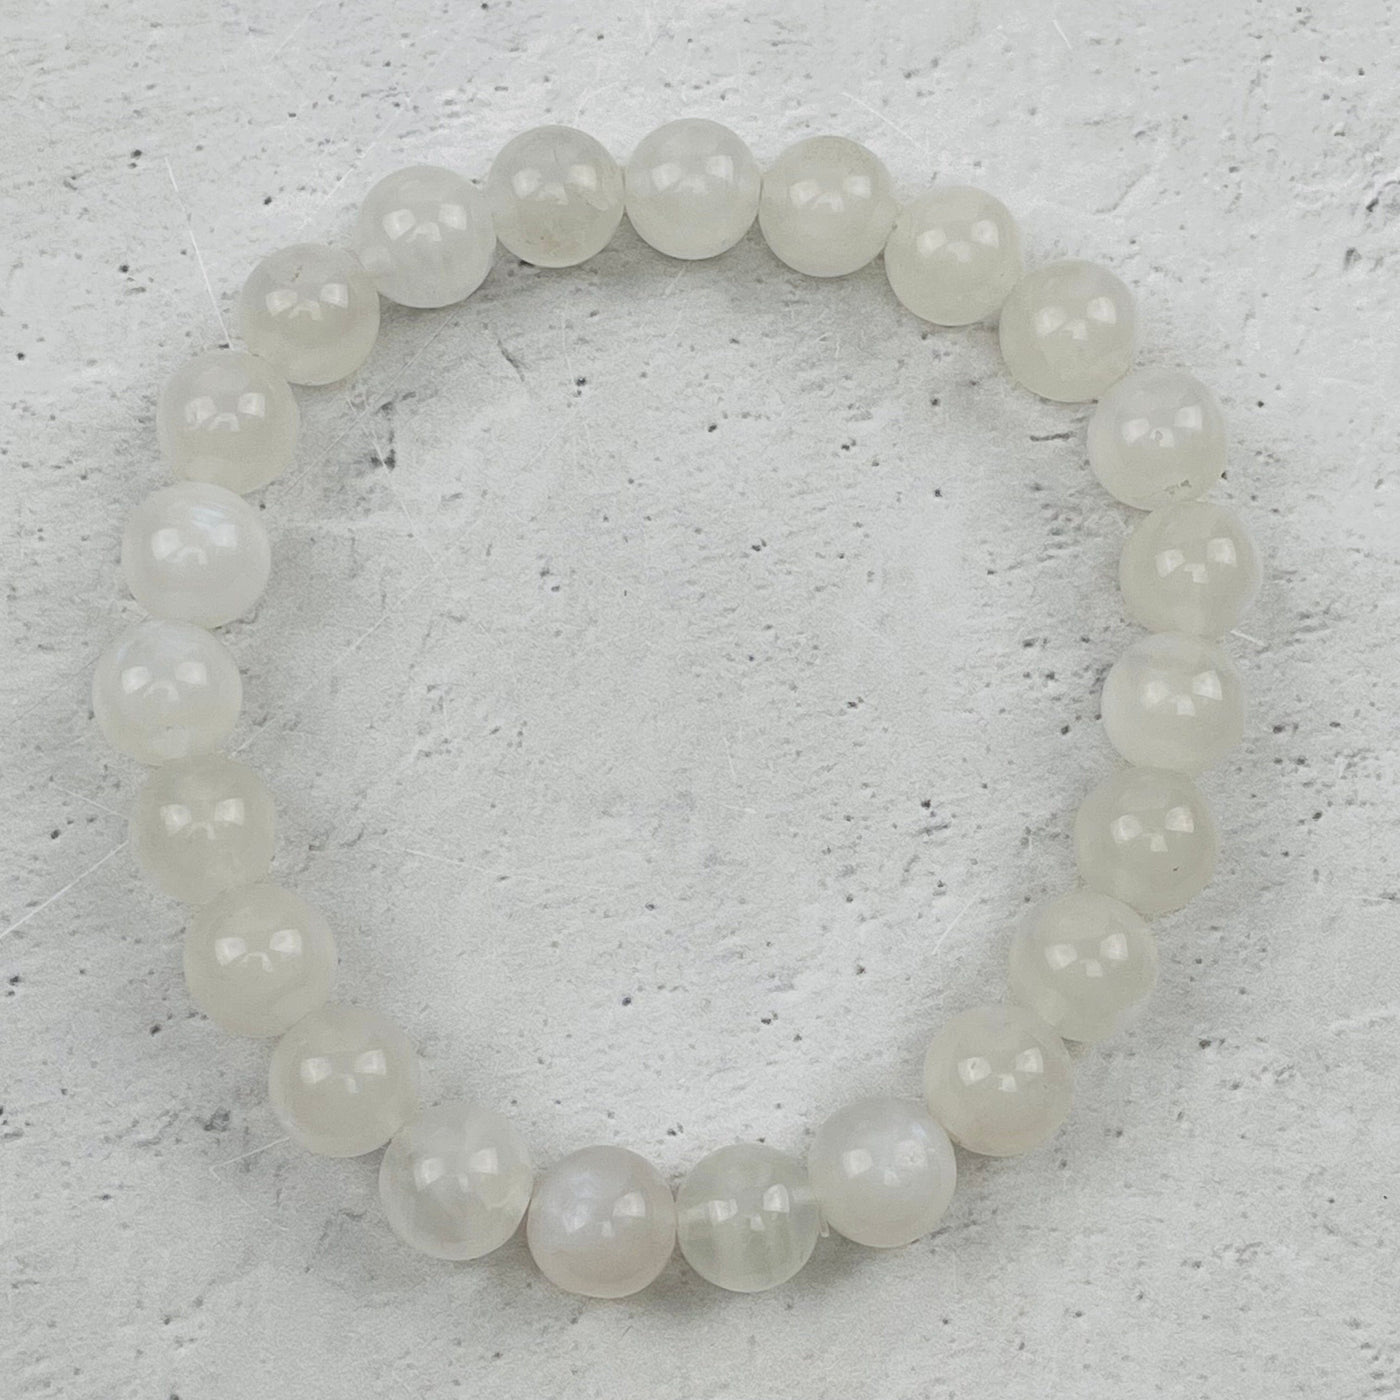 close up of the high quality moonstone bracelet 